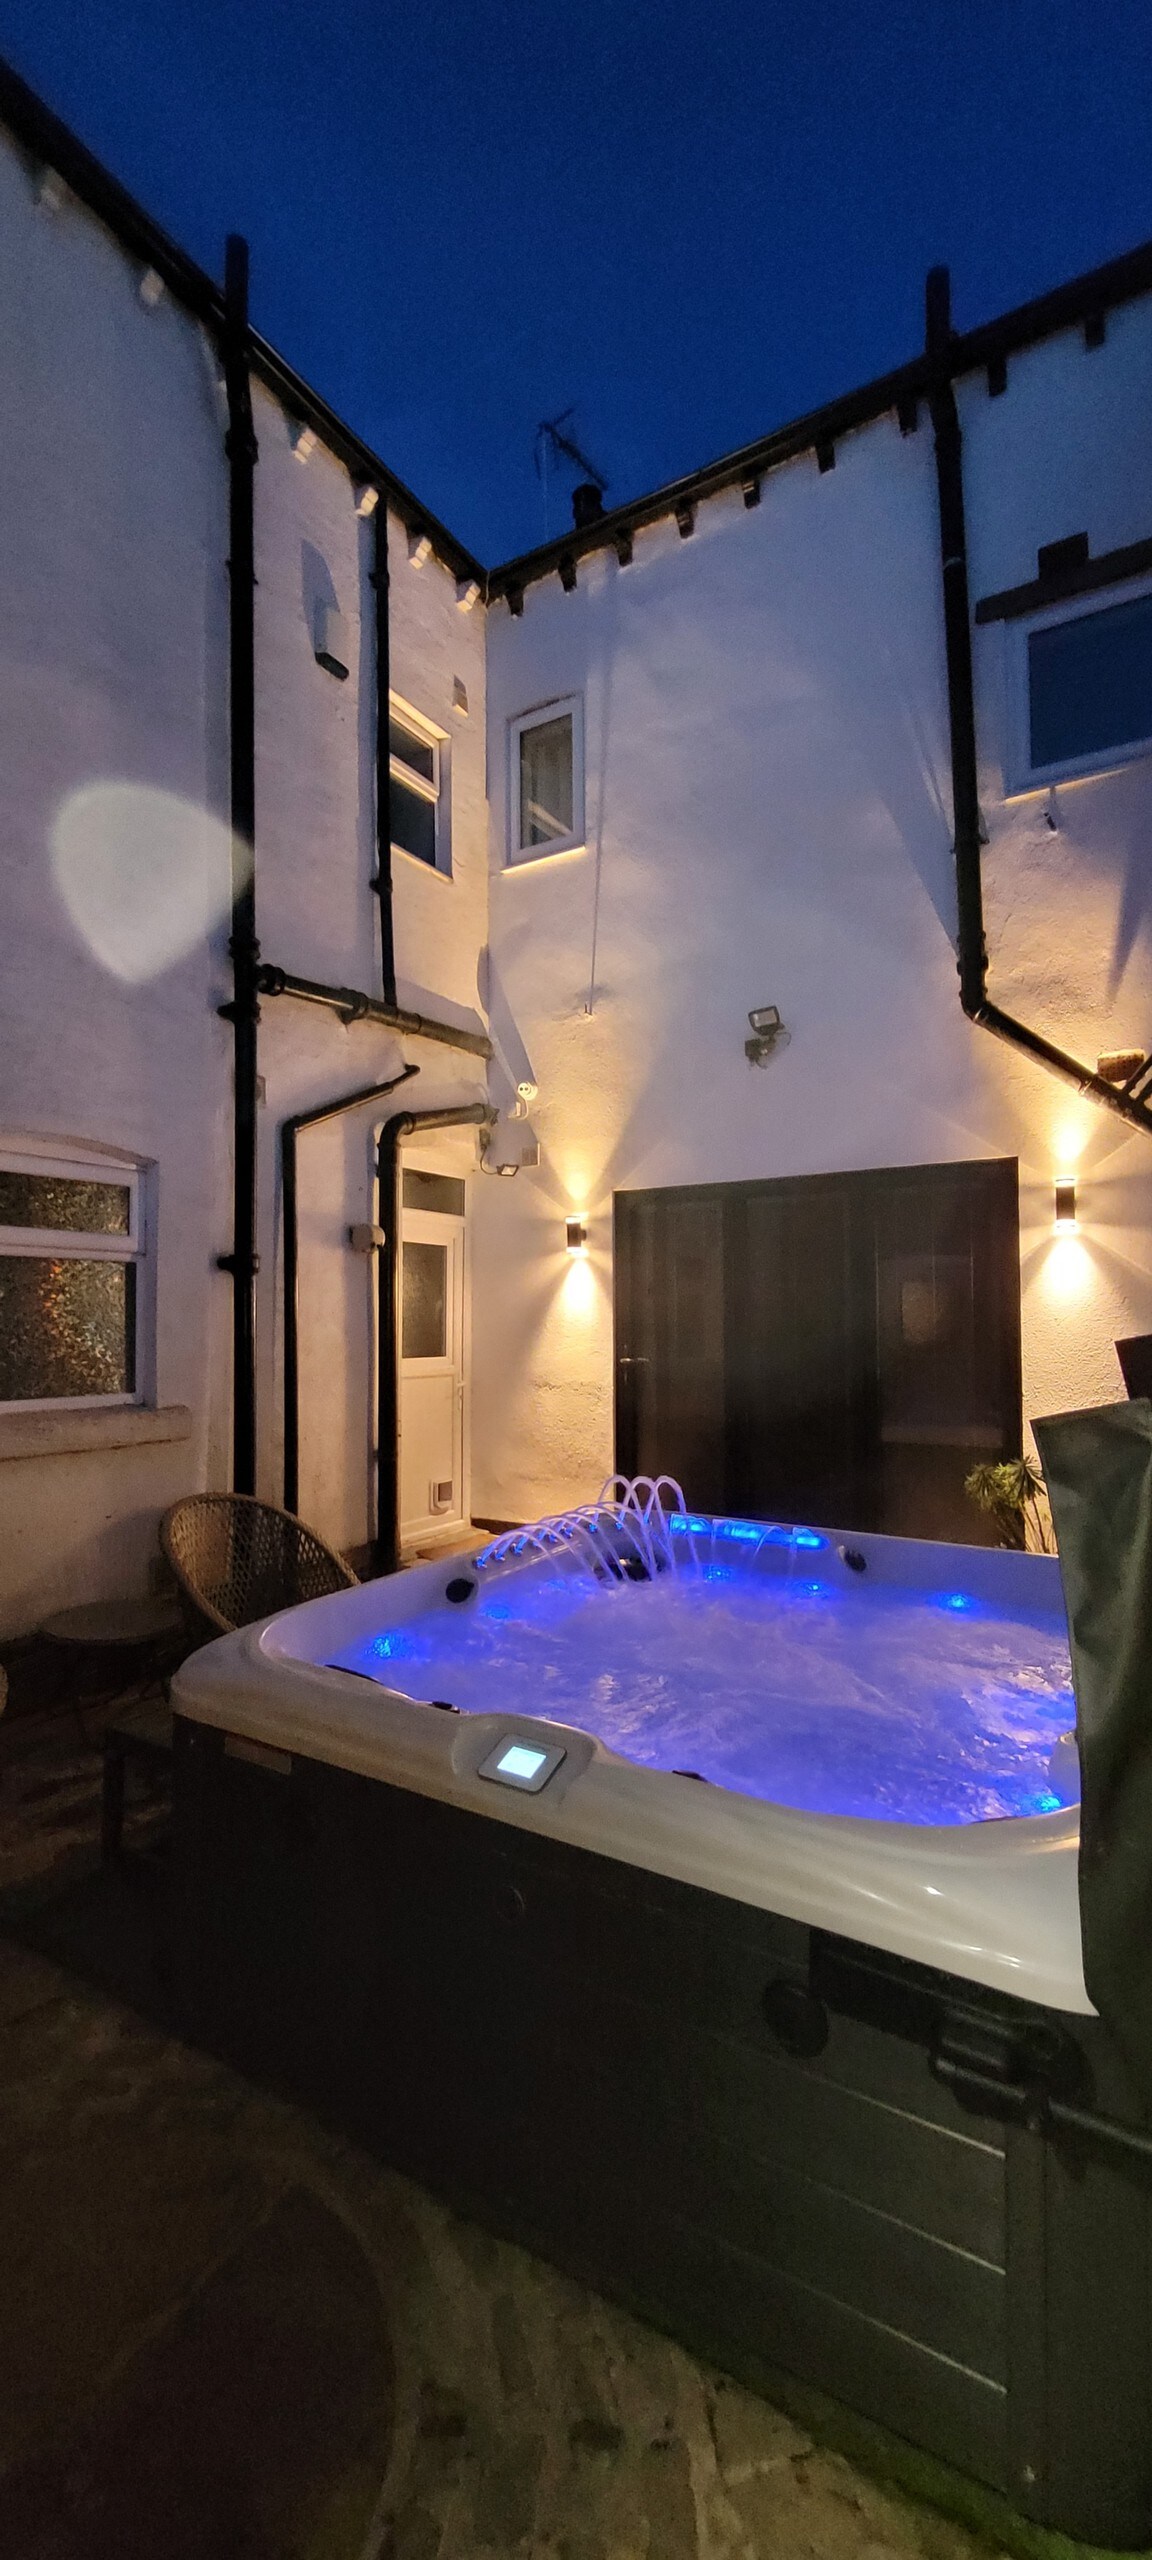 Modern Detached Studio in North Leeds with Hot Tub